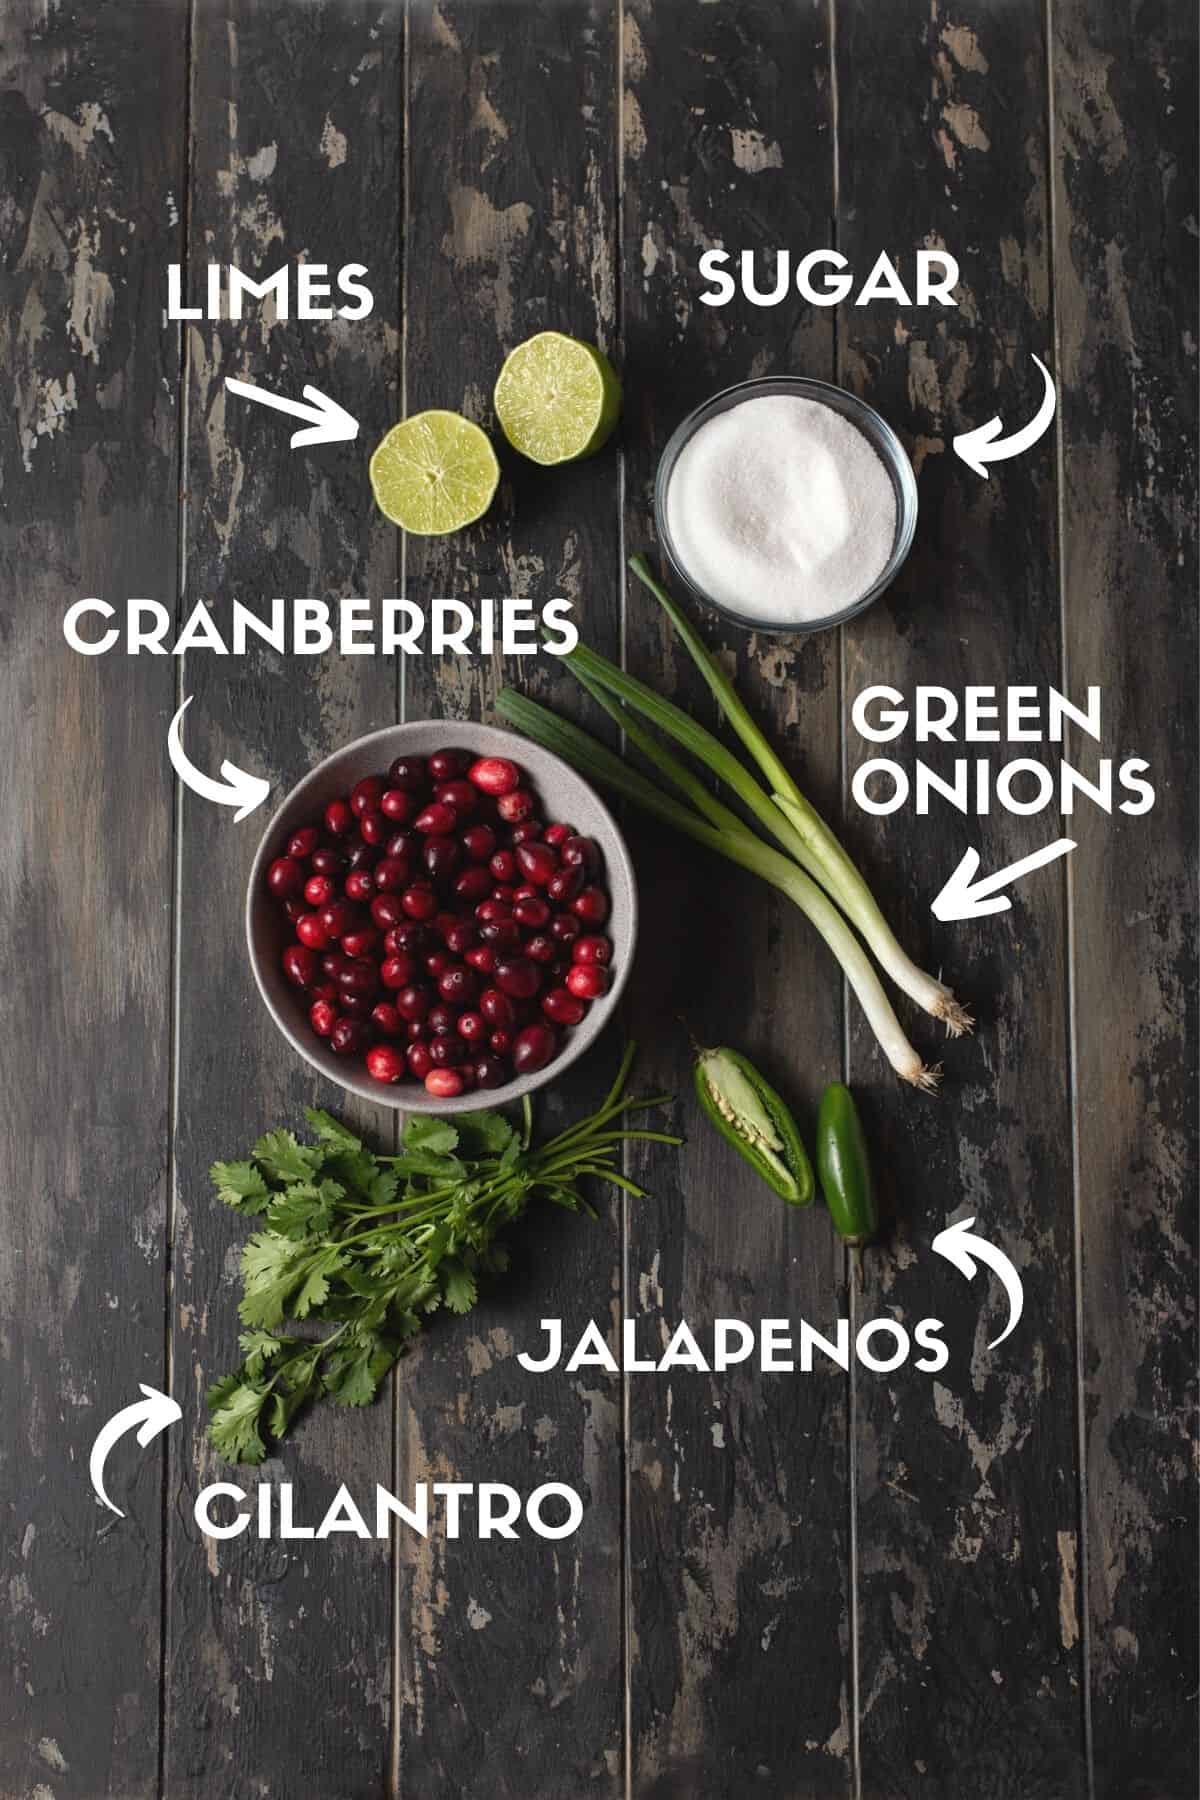 Salsa and Cranberry ingredients text.